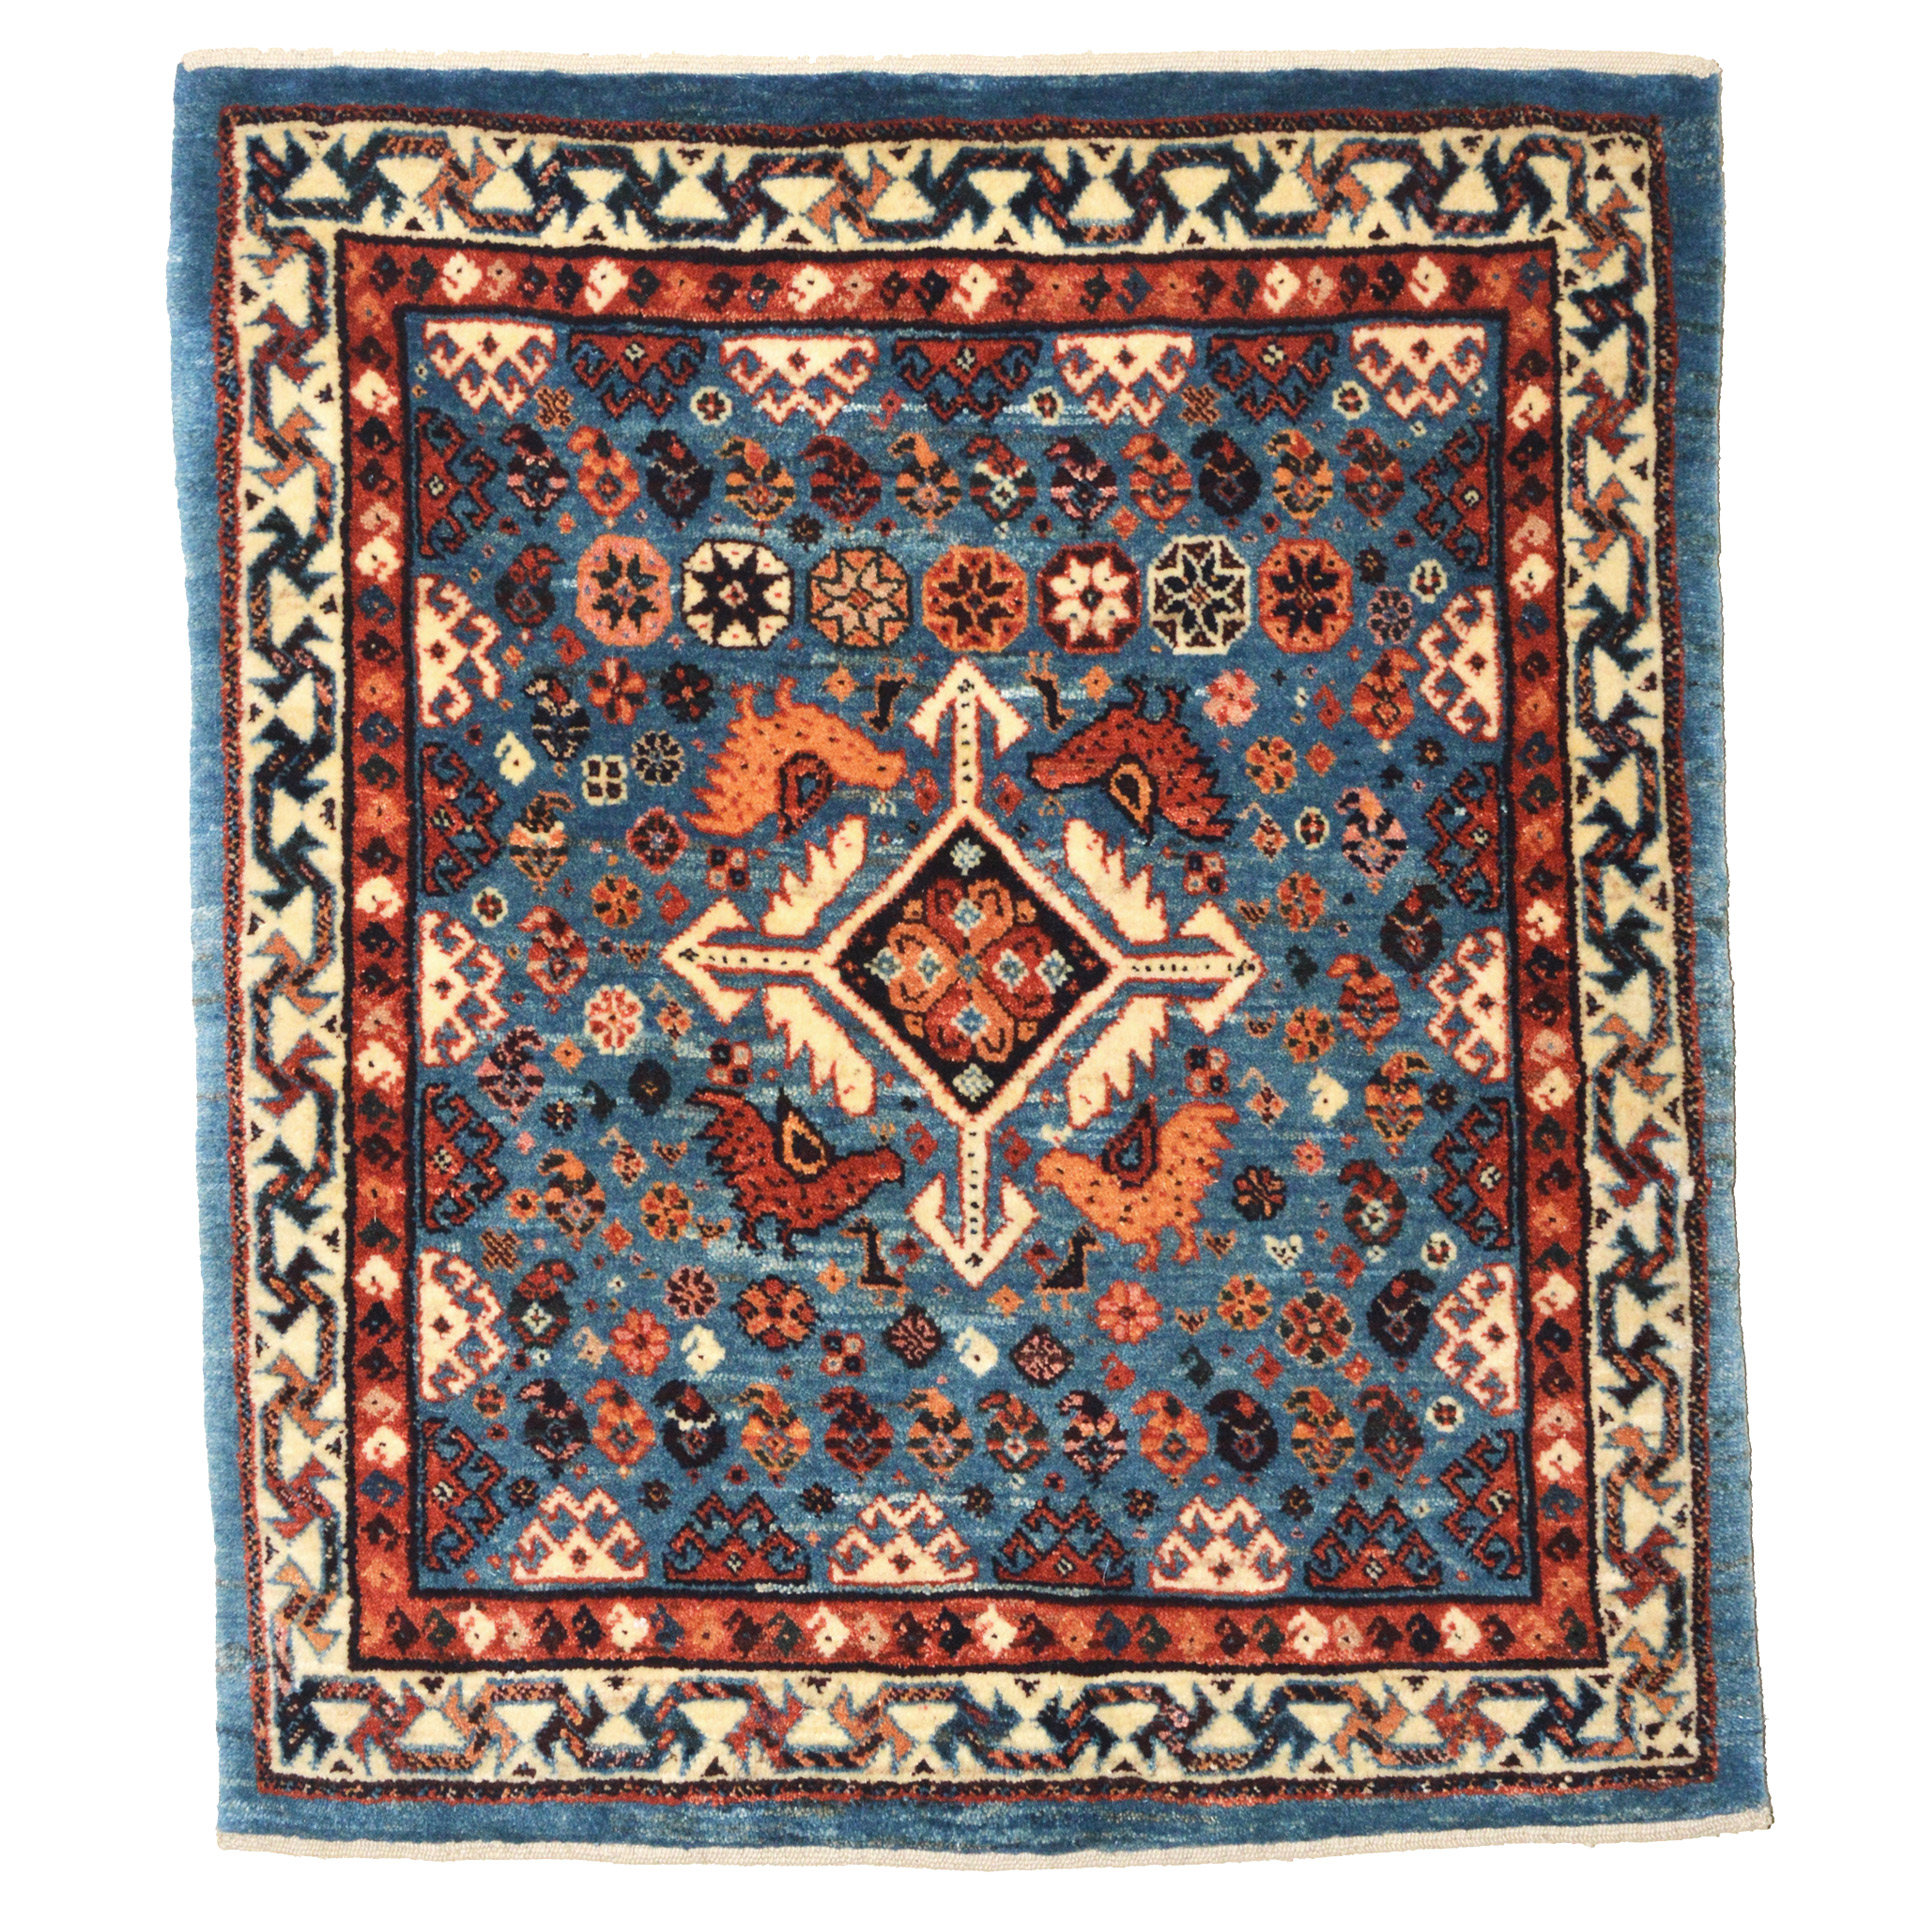 A new, hand woven QashQa'i rug utilizing natural dyes and hand spun wool. The deep sky blue field is decorated with stylized birds, small animals, Boteh and geometric motifs. Douglas Stock Gallery is the Boston area's most selective dealer in antique Oriental rugs and new, hand woven natural dye rugs. Oriental rugs, Beacon Hill, Back Bay, Brookline, Newton, Weston, Wellesley, South Natick,MA area, Oriental rugs New England